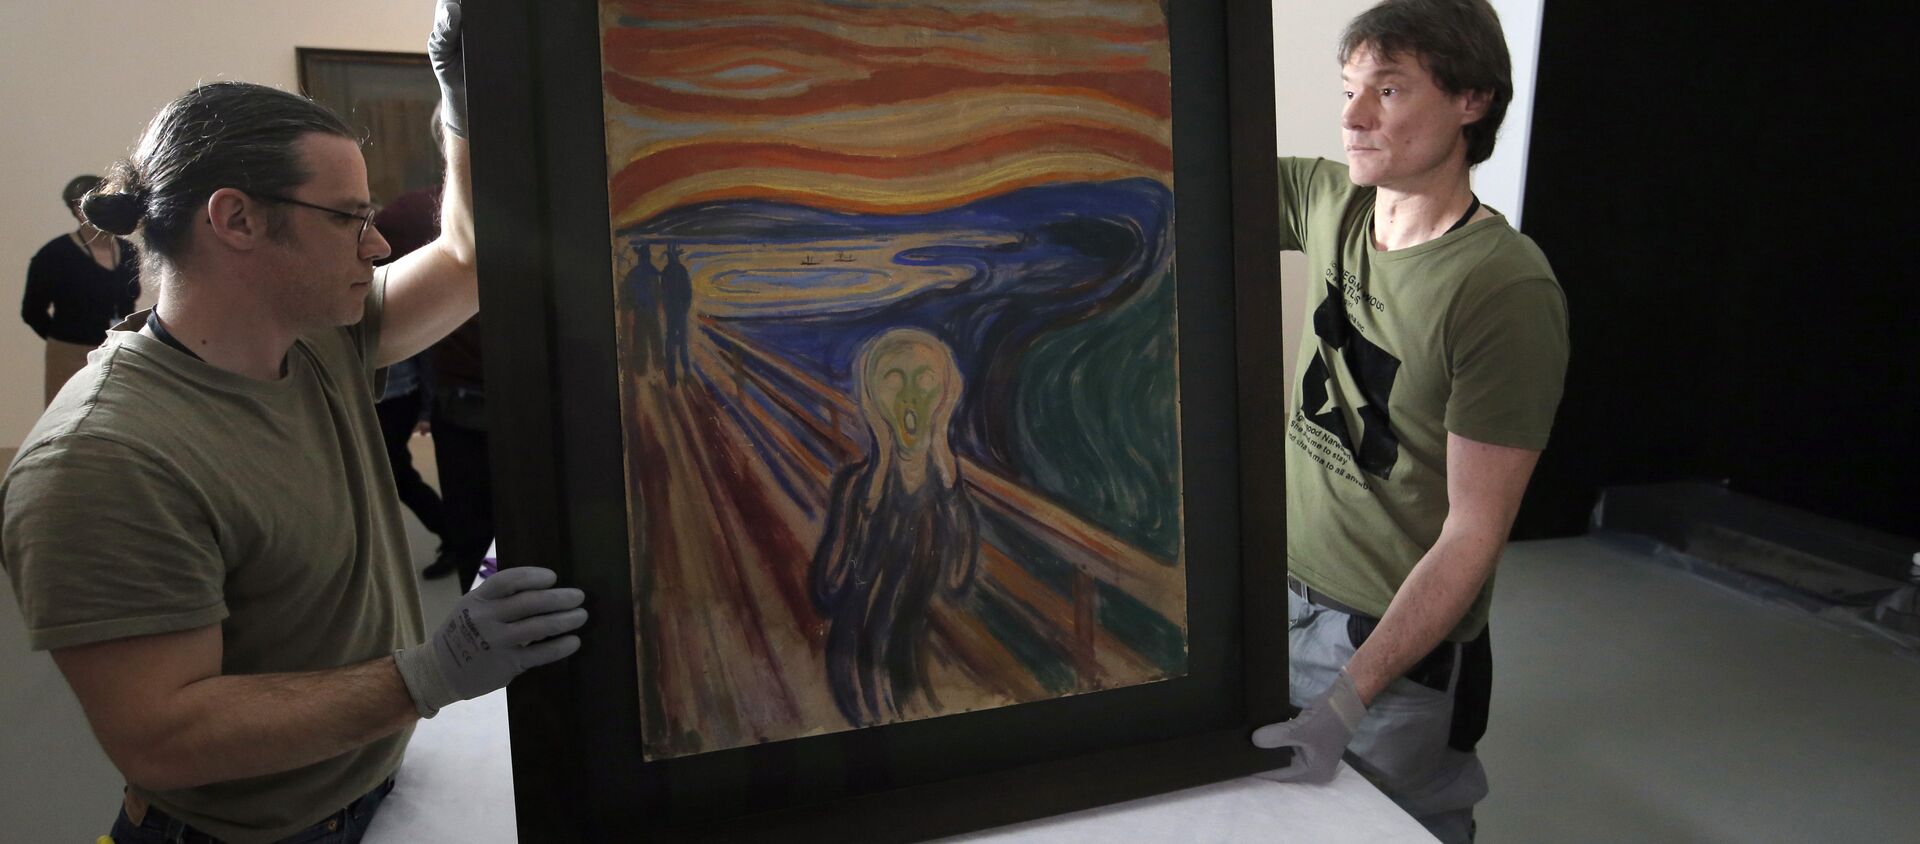 In this photo taken on Wednesday, March 18, 2015, employees present the painting The Scream by Edvard Munch, prior to it being exhibited, at the Louis Vuitton Foundation in Paris, France. - Sputnik International, 1920, 23.02.2021